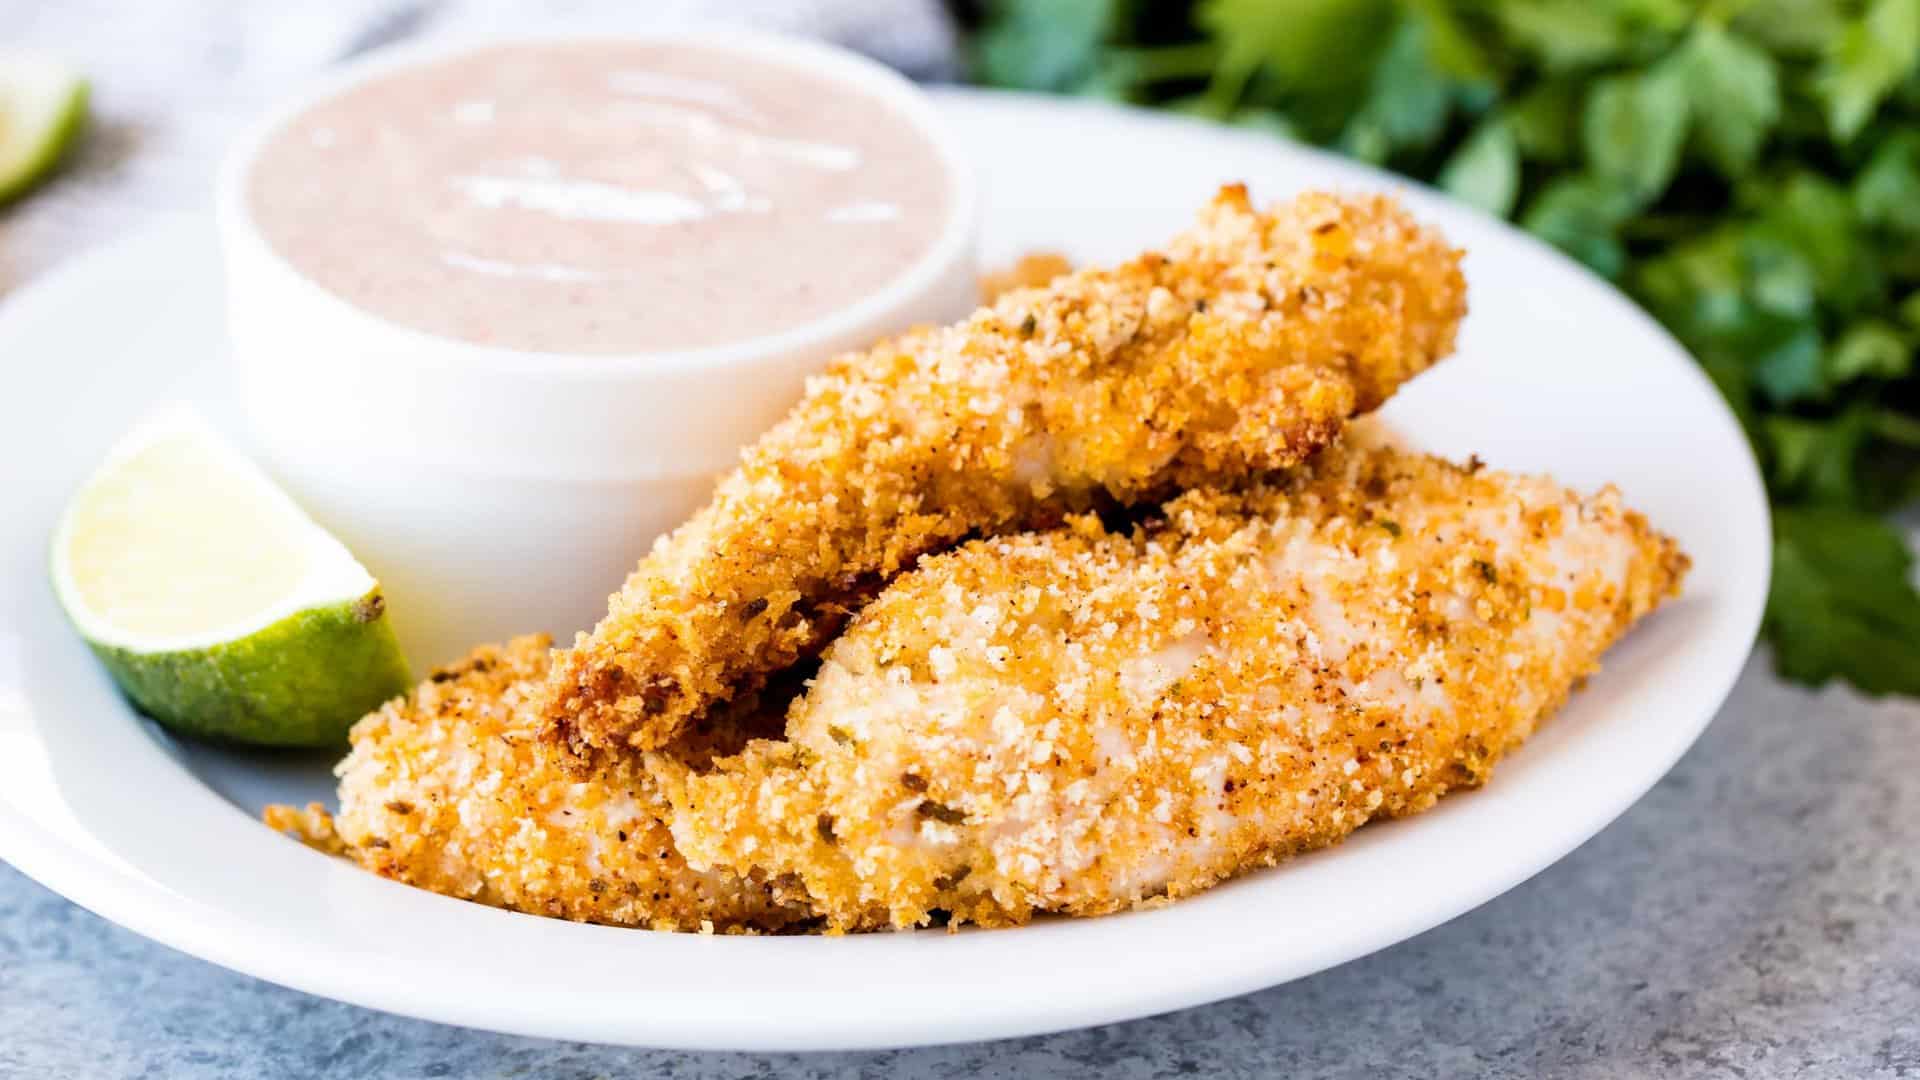 Chili-Lime Baked Chicken Tenders take the classic flavor combination and mashes it with a kid favorite, for a grown up version of chicken tenders that will have you licking your fingers! This easy dinner will be a hit with the whole family!